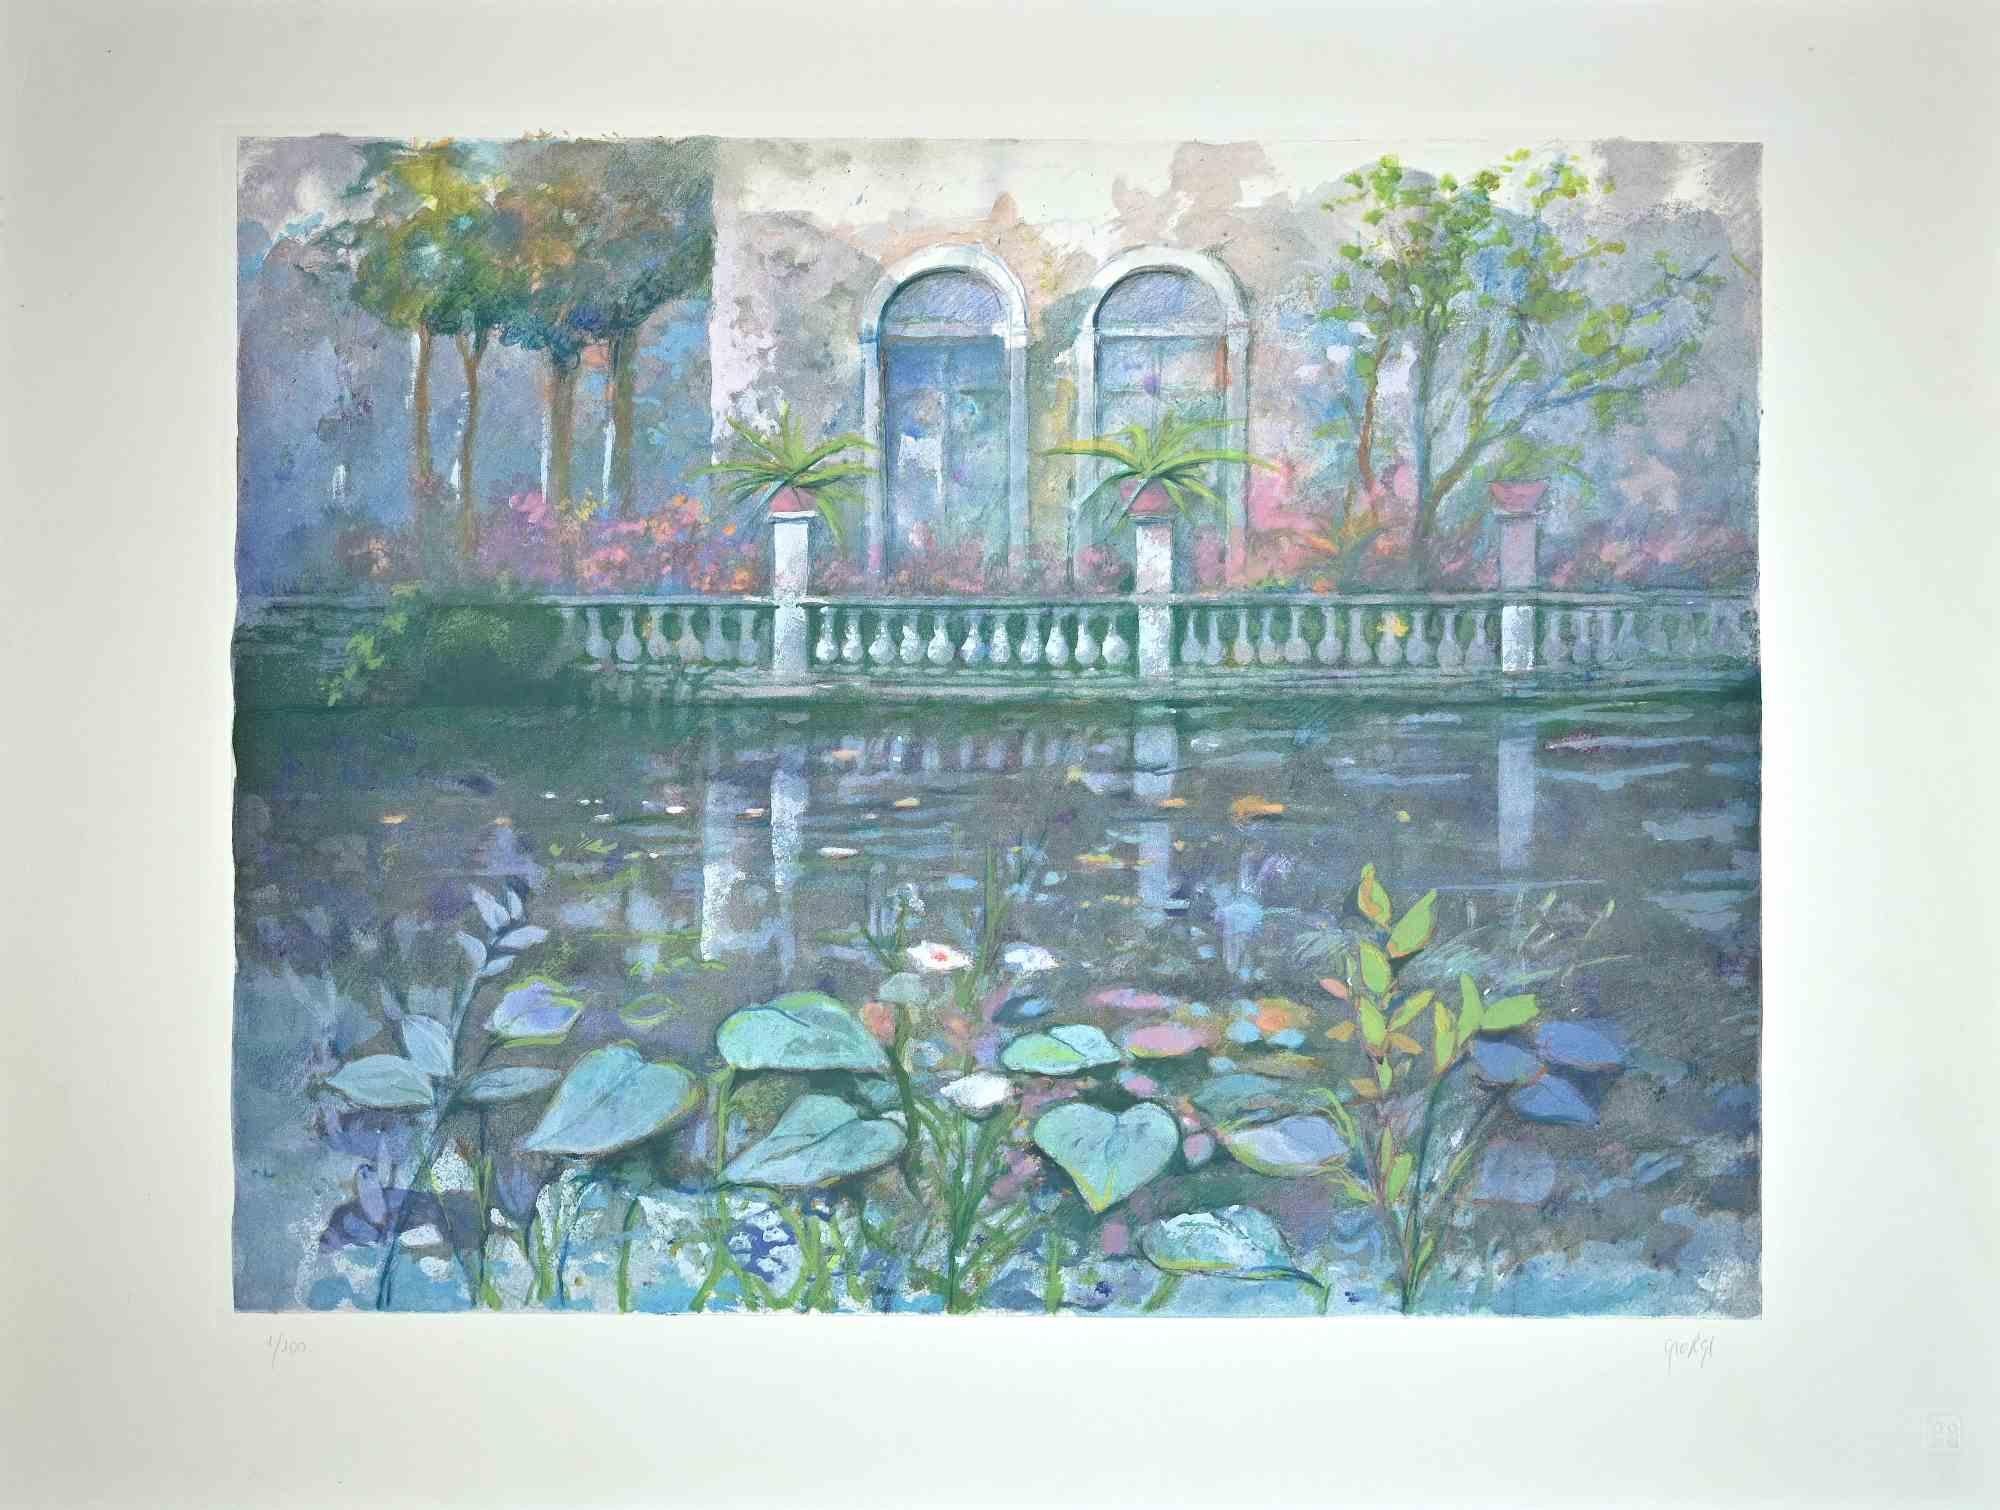 Villa on the lake is an original aquatint and etching print artwork realized by Italian artist Giuseppe Giorgi.

Hand-signed on the lower right in pencil. Numbered on the lower left, the edition of 100 prints.

Titled "Villa sul Lago"

Very good